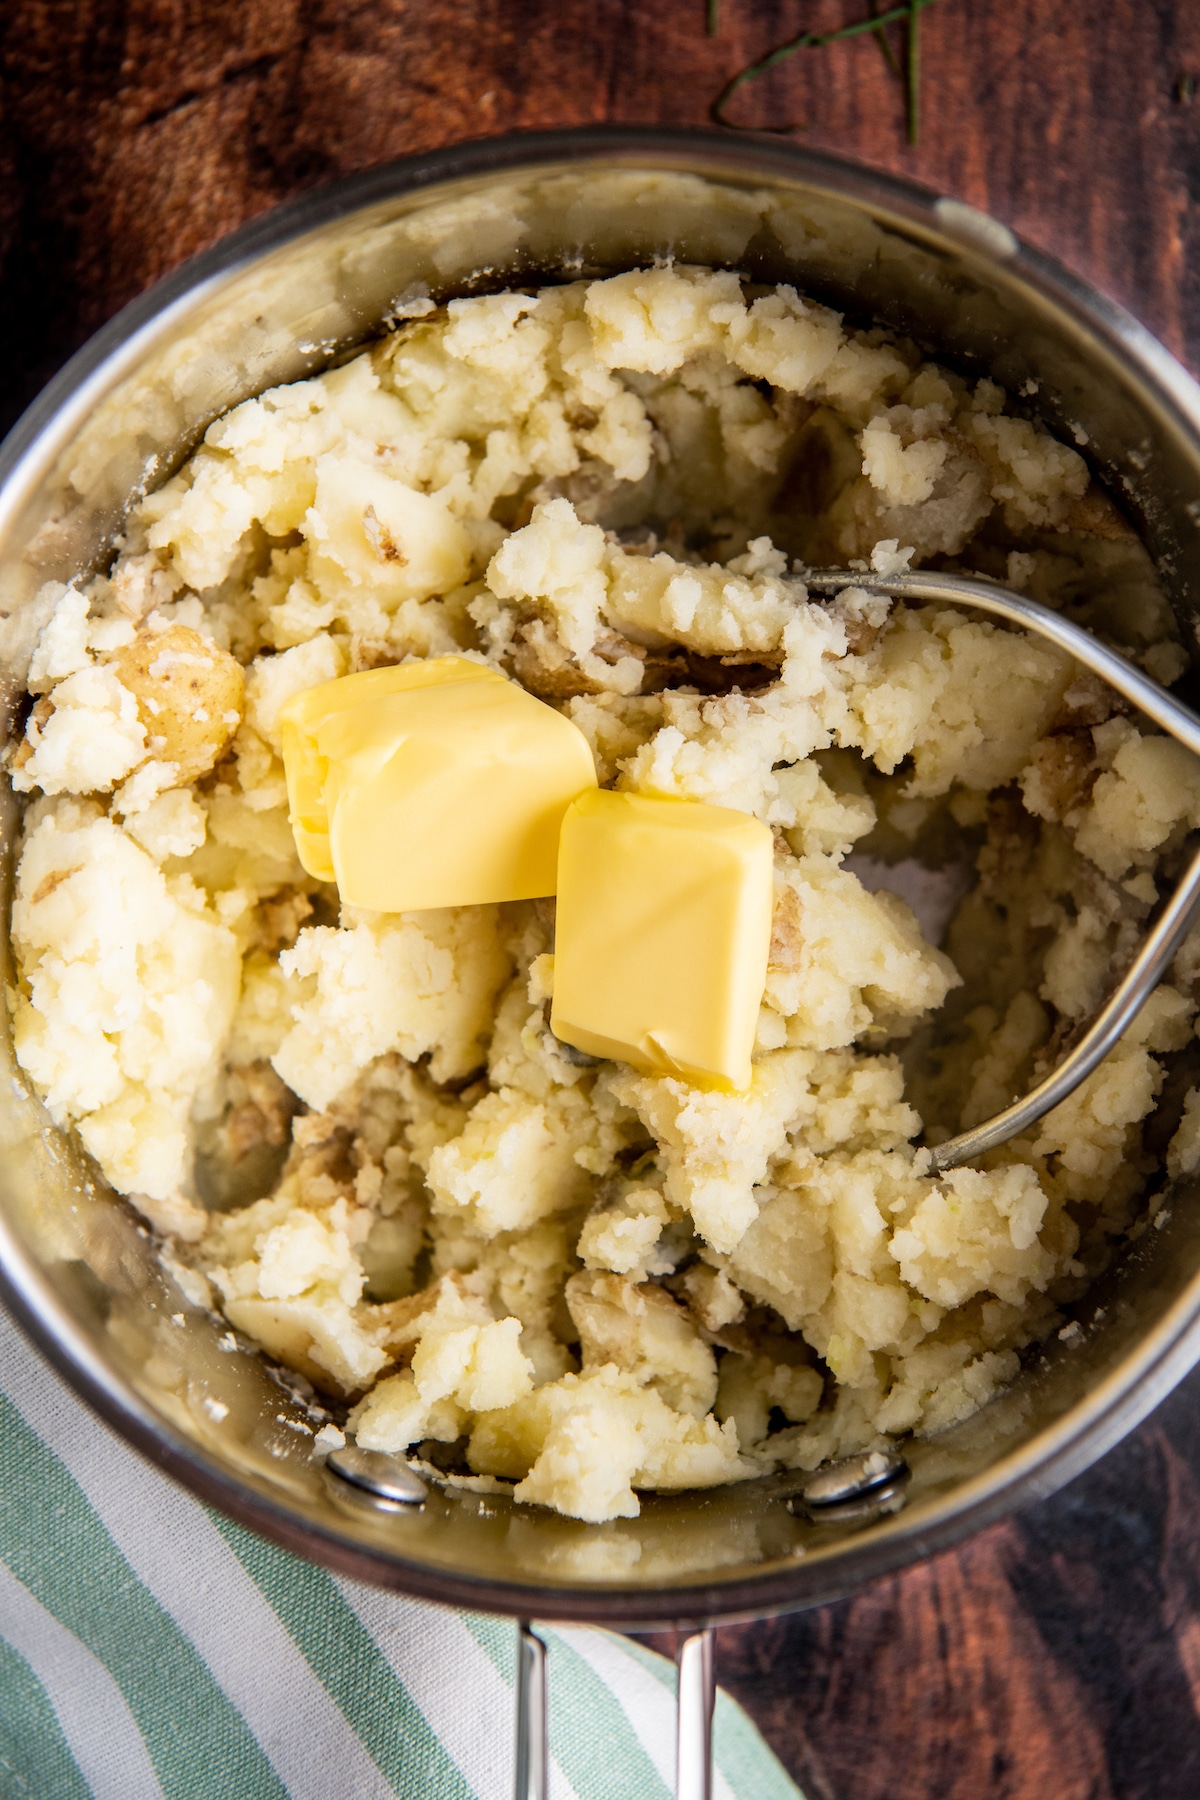 Butter being added to mashed potatoes in a pot.